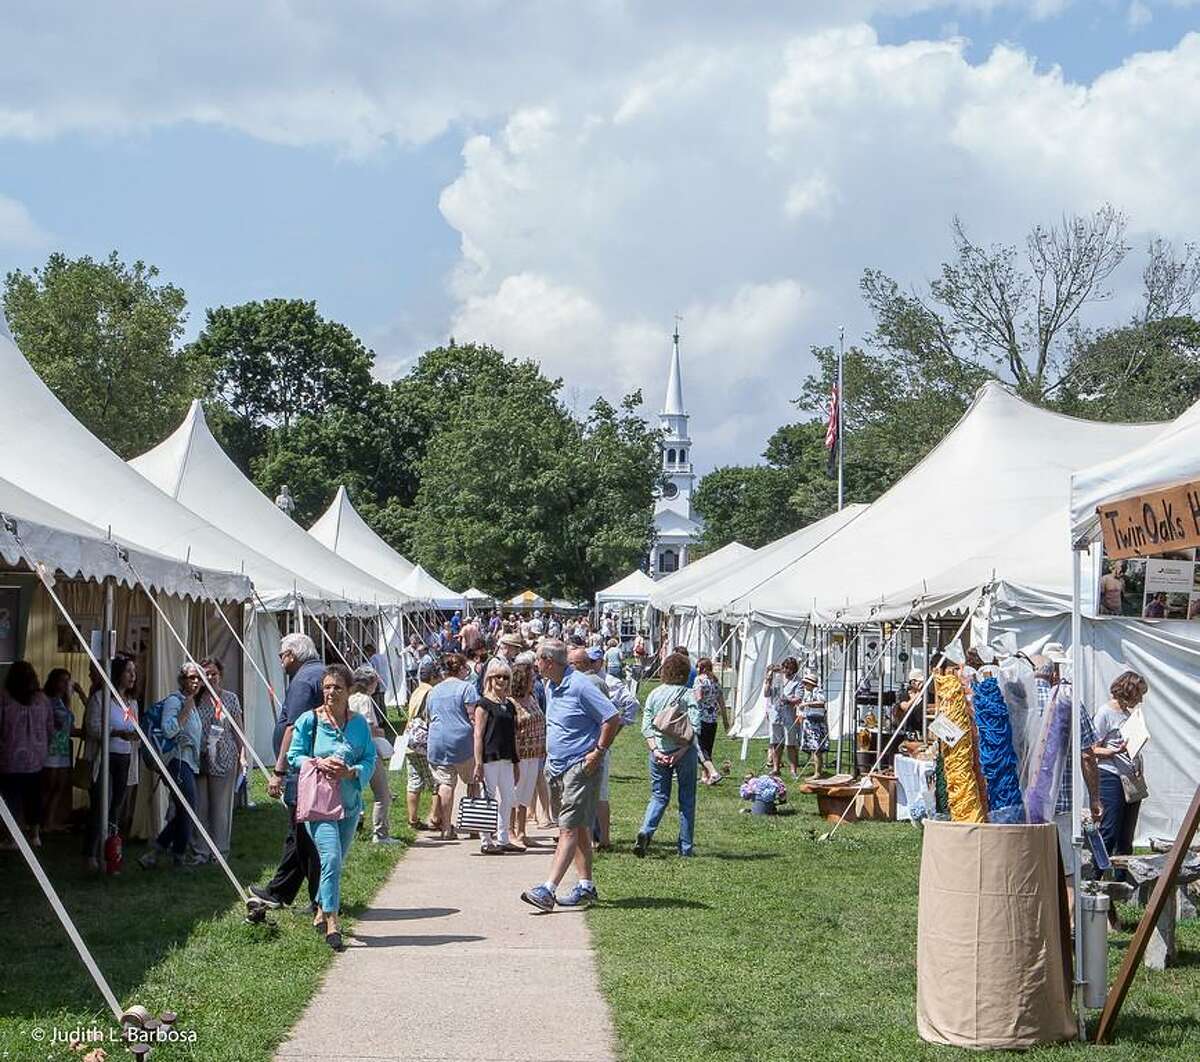 The Guilford Crafts Expo runs Thursday through Sunday. Find out more.